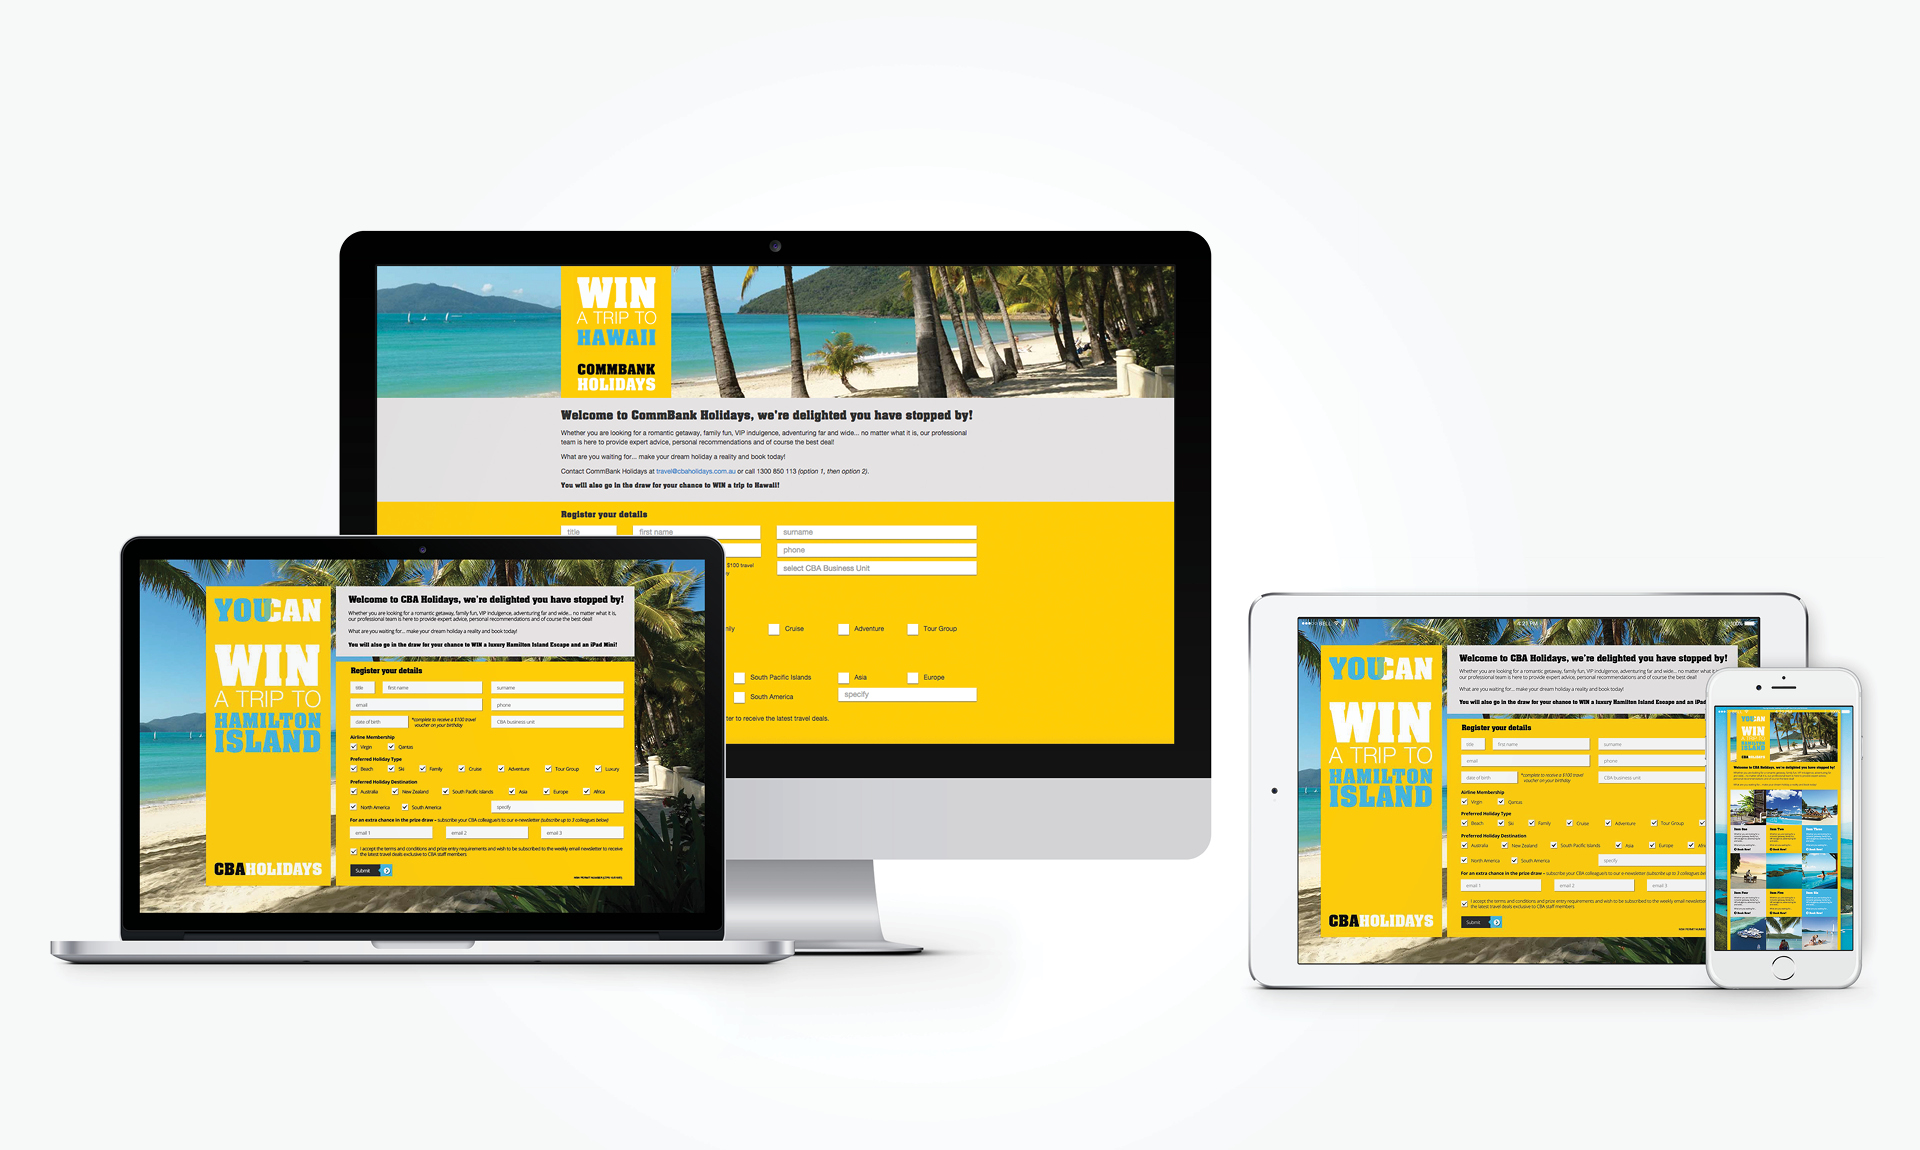 CommBank Holidays Microsite launch 3